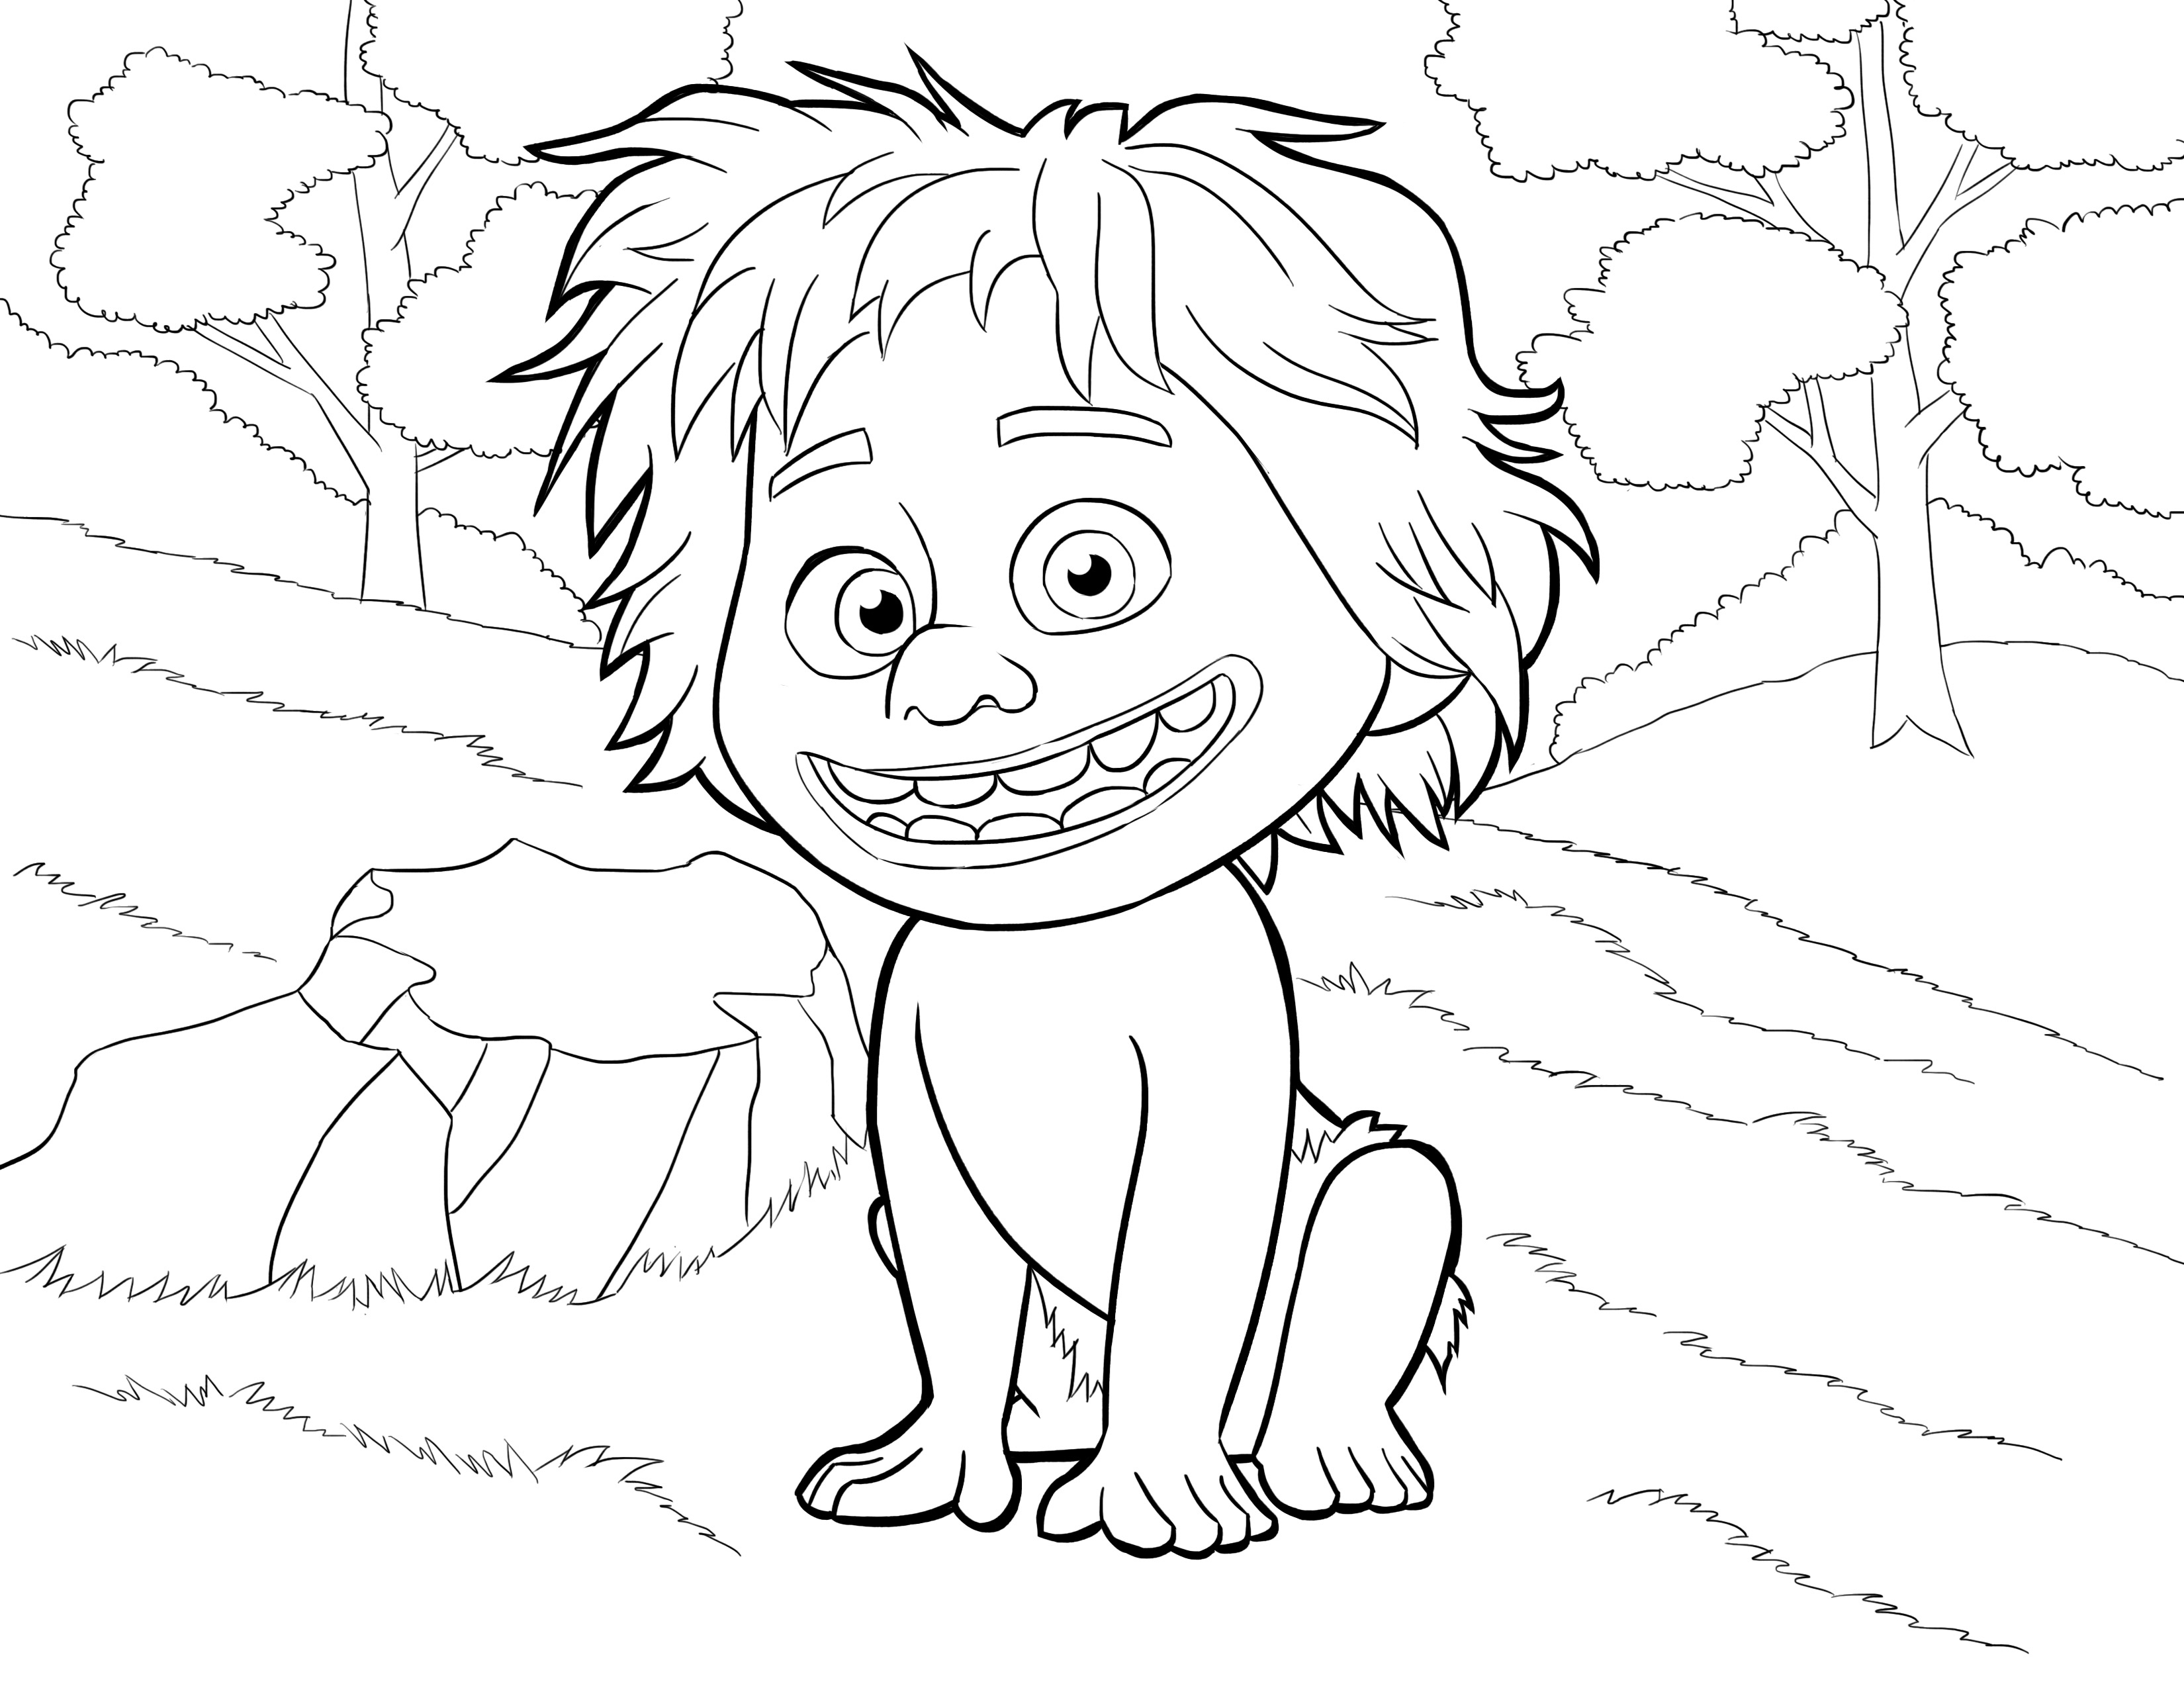 The good dinosaur coloring pages to download and print for free